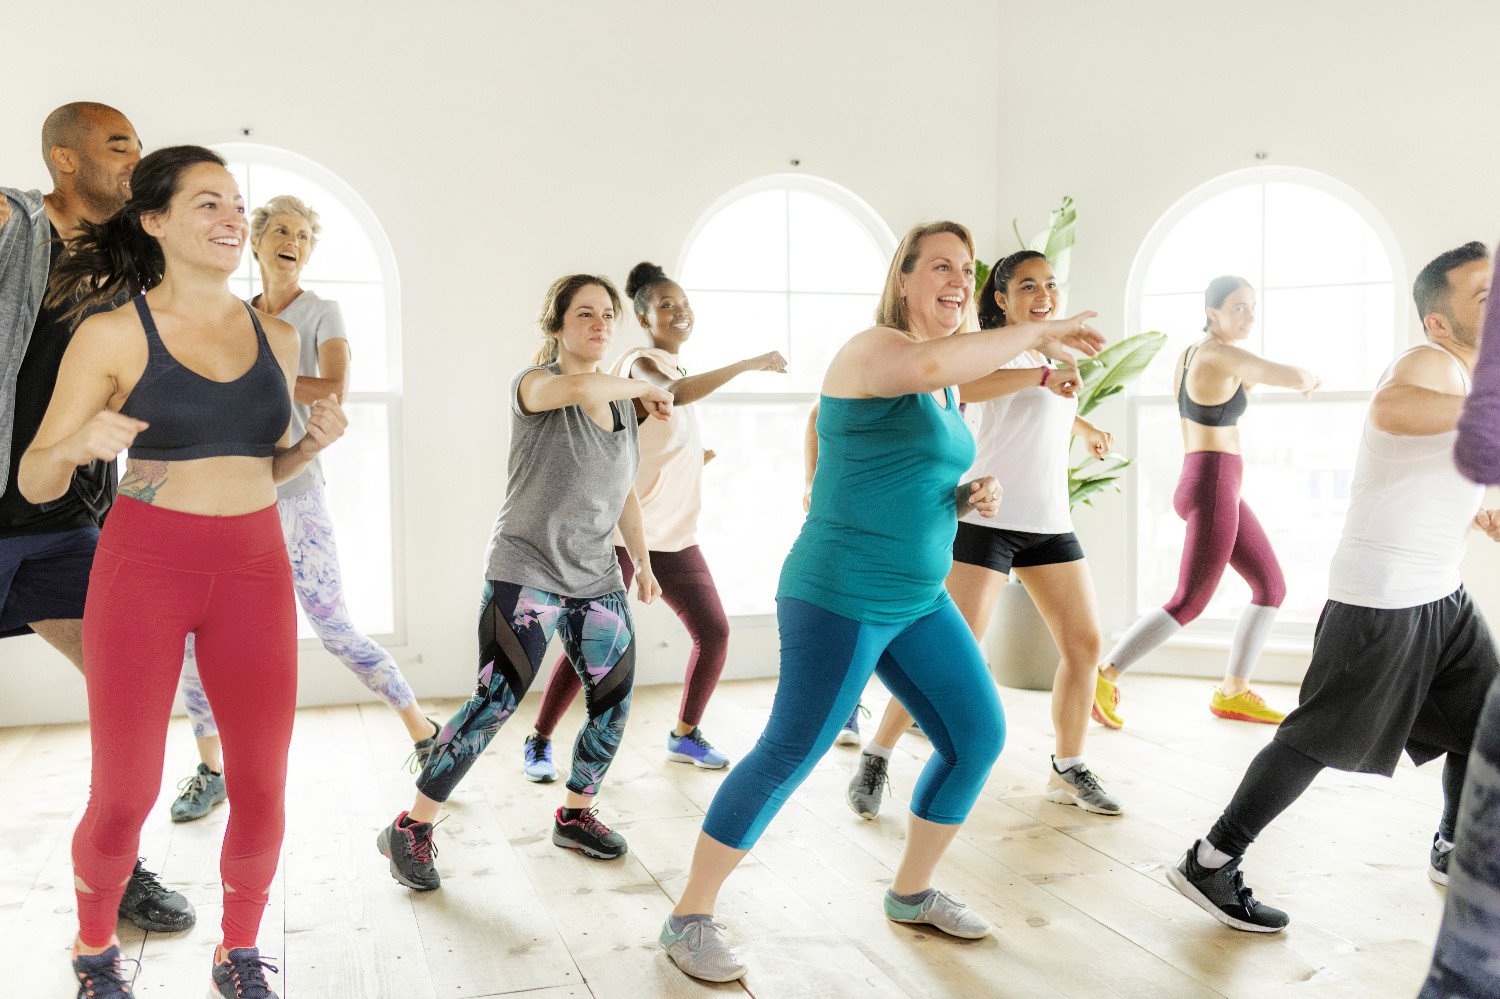 7 Reasons to Sign Up for Dance Lessons as an Adult